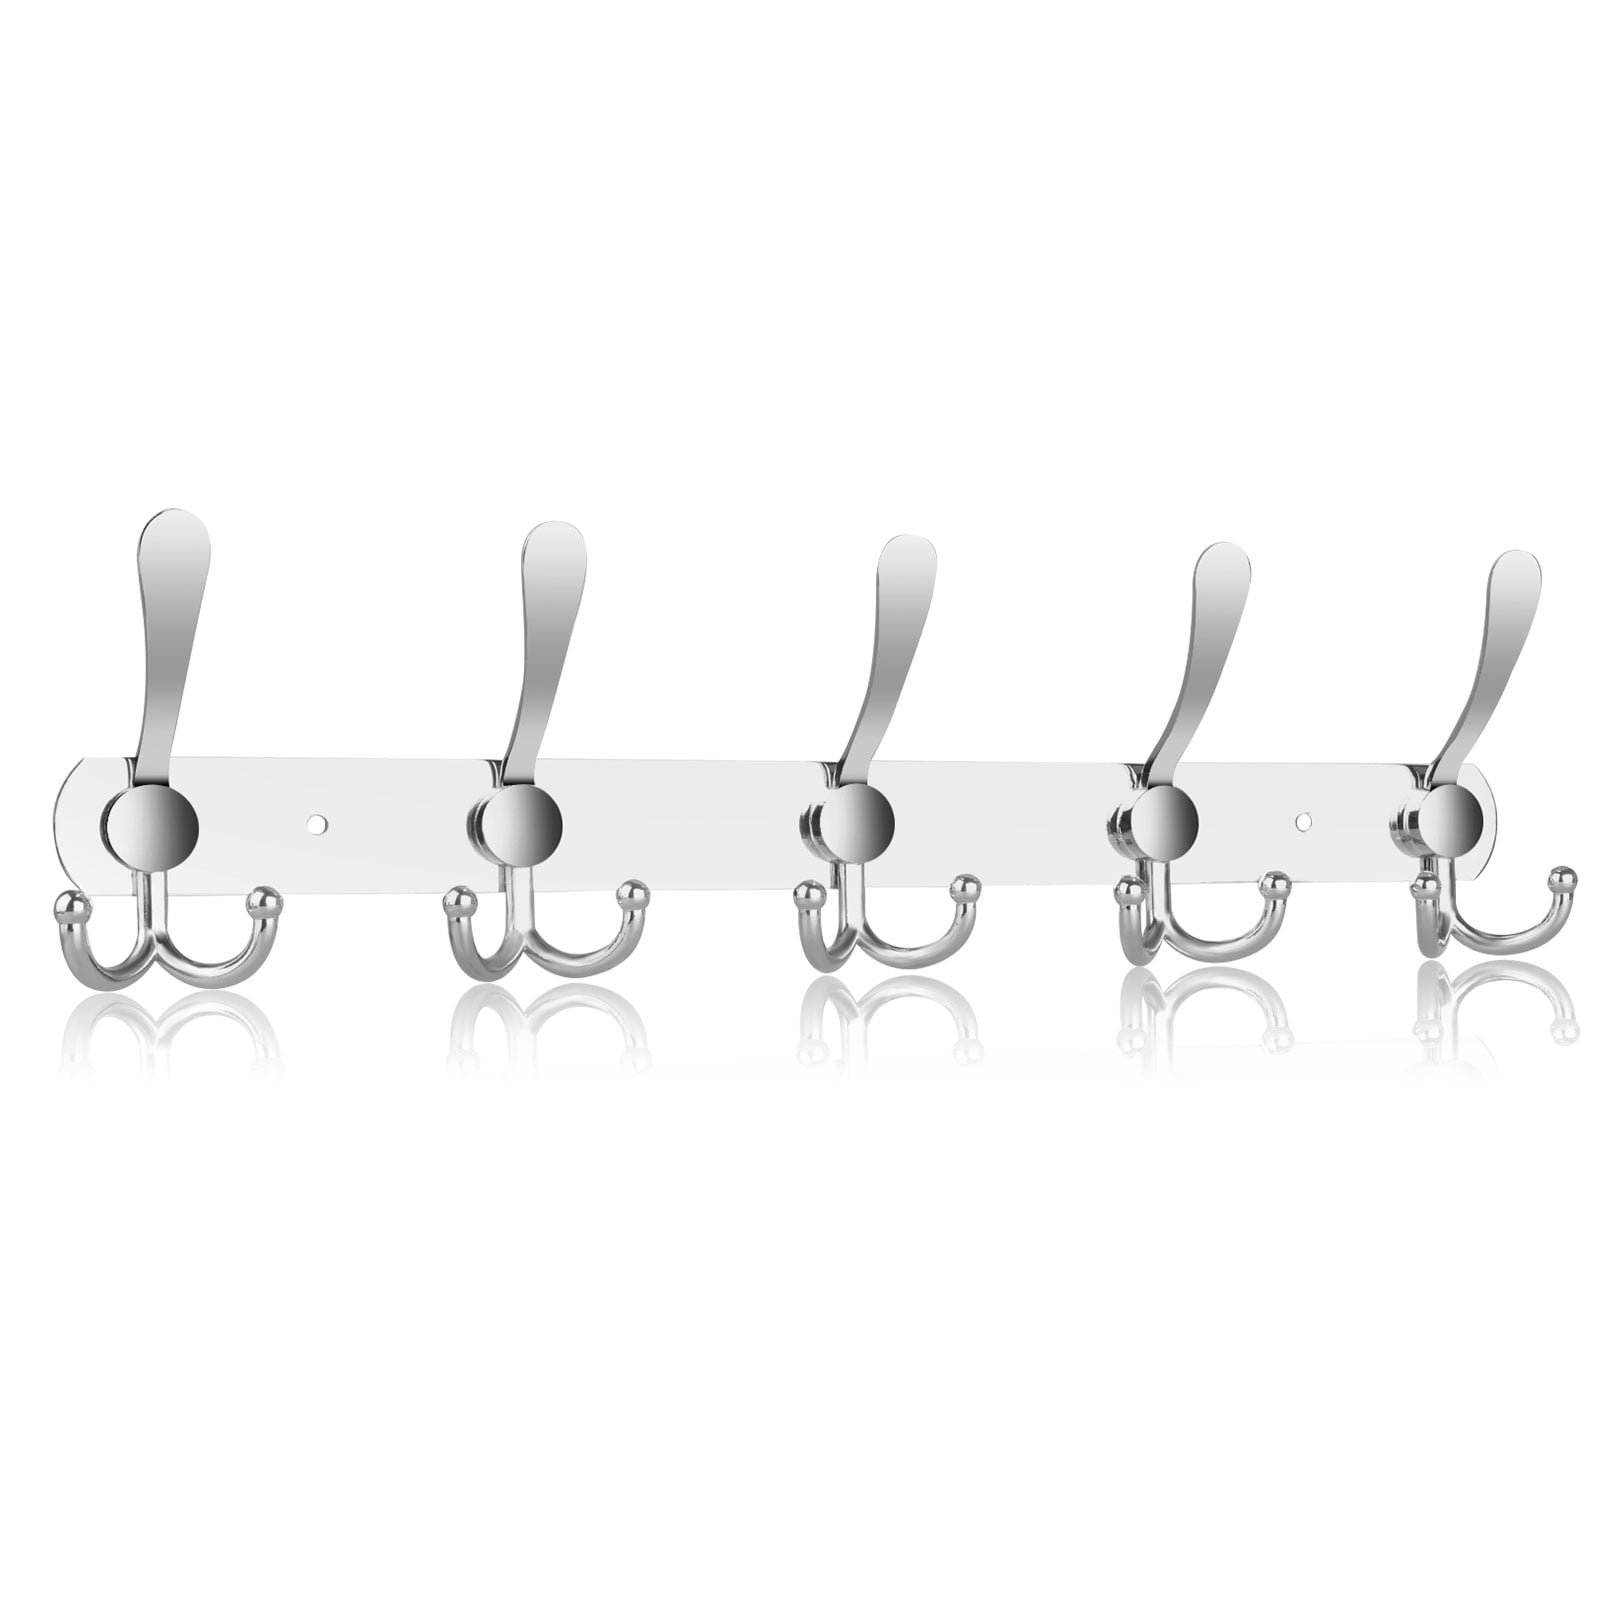 4 Pack of Chrome Double Coat Hooks Door & Wall Robe Dress Garment Hangers by SmartHome 